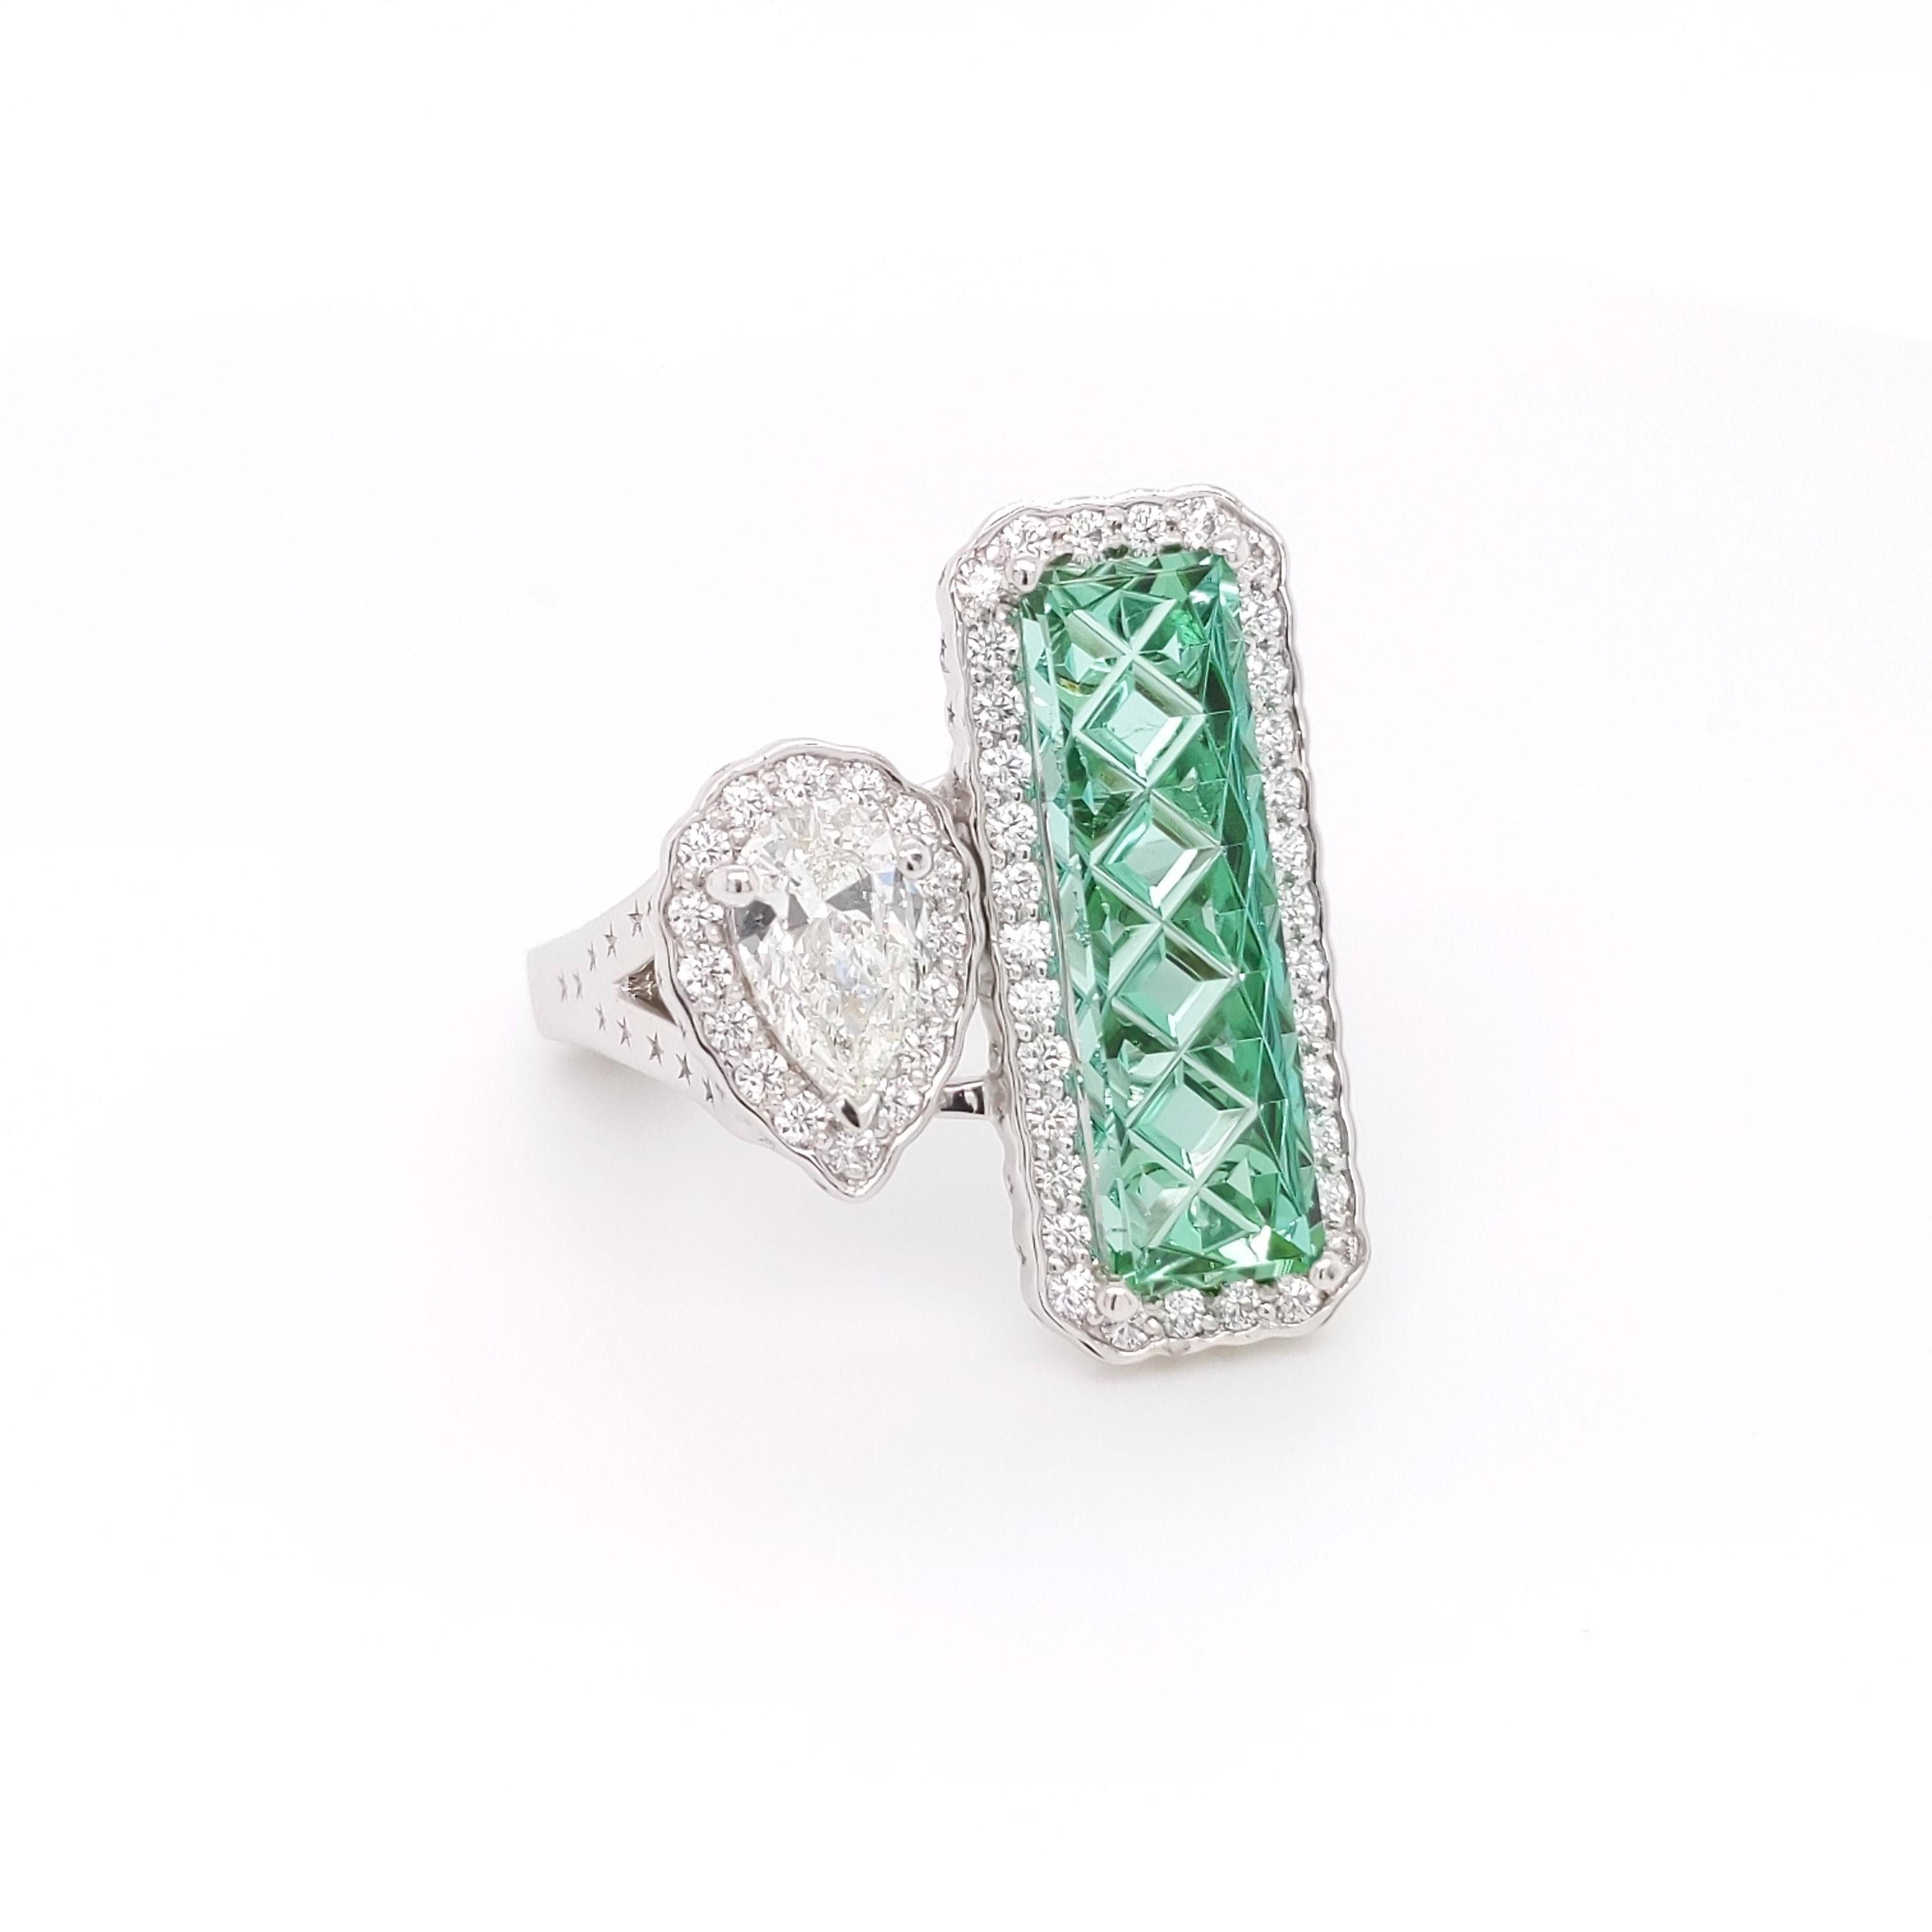 One of a kind Custom by a collaboration of top talent. 1st the design is by Erica Sanchez-Hawkins, an award winning designer, the Tourmaline was made by an multi-award winning lapidary and the diamonds by one of the finest diamond cutters in the